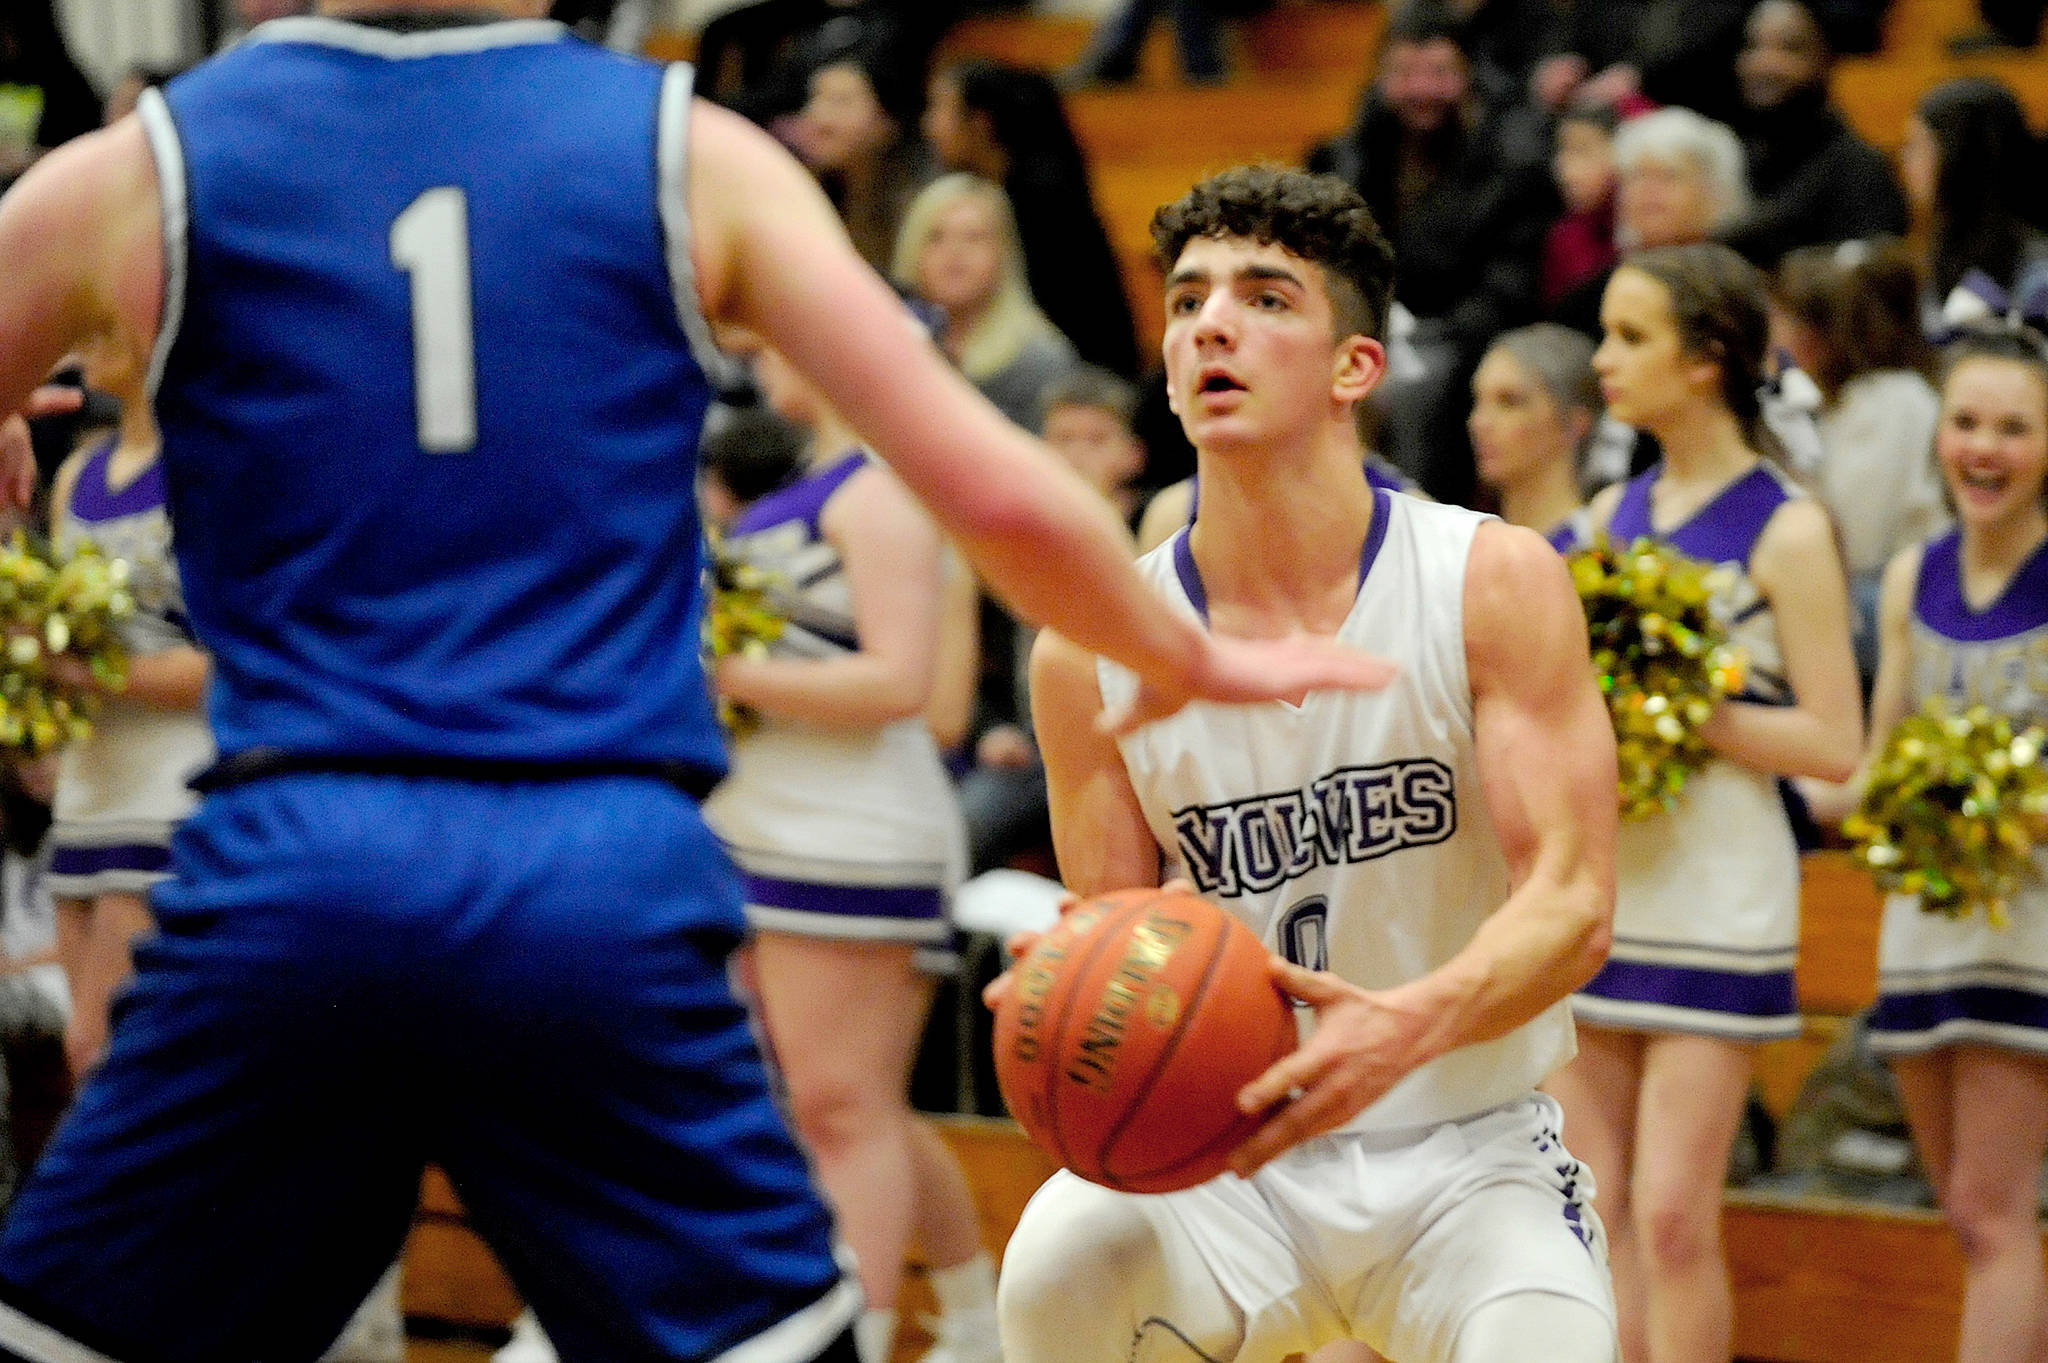 Wolves’ guard Dallin Despain sets up for amid-range shot against the North Mason Bulldogs on Jan. 22. Despain scored nine points on the night and his defense was key to the Wolves’ holding North Mason off in the fourth quarter as they secured a 51-26 win. Sequim Gazette photo by Conor Dowley